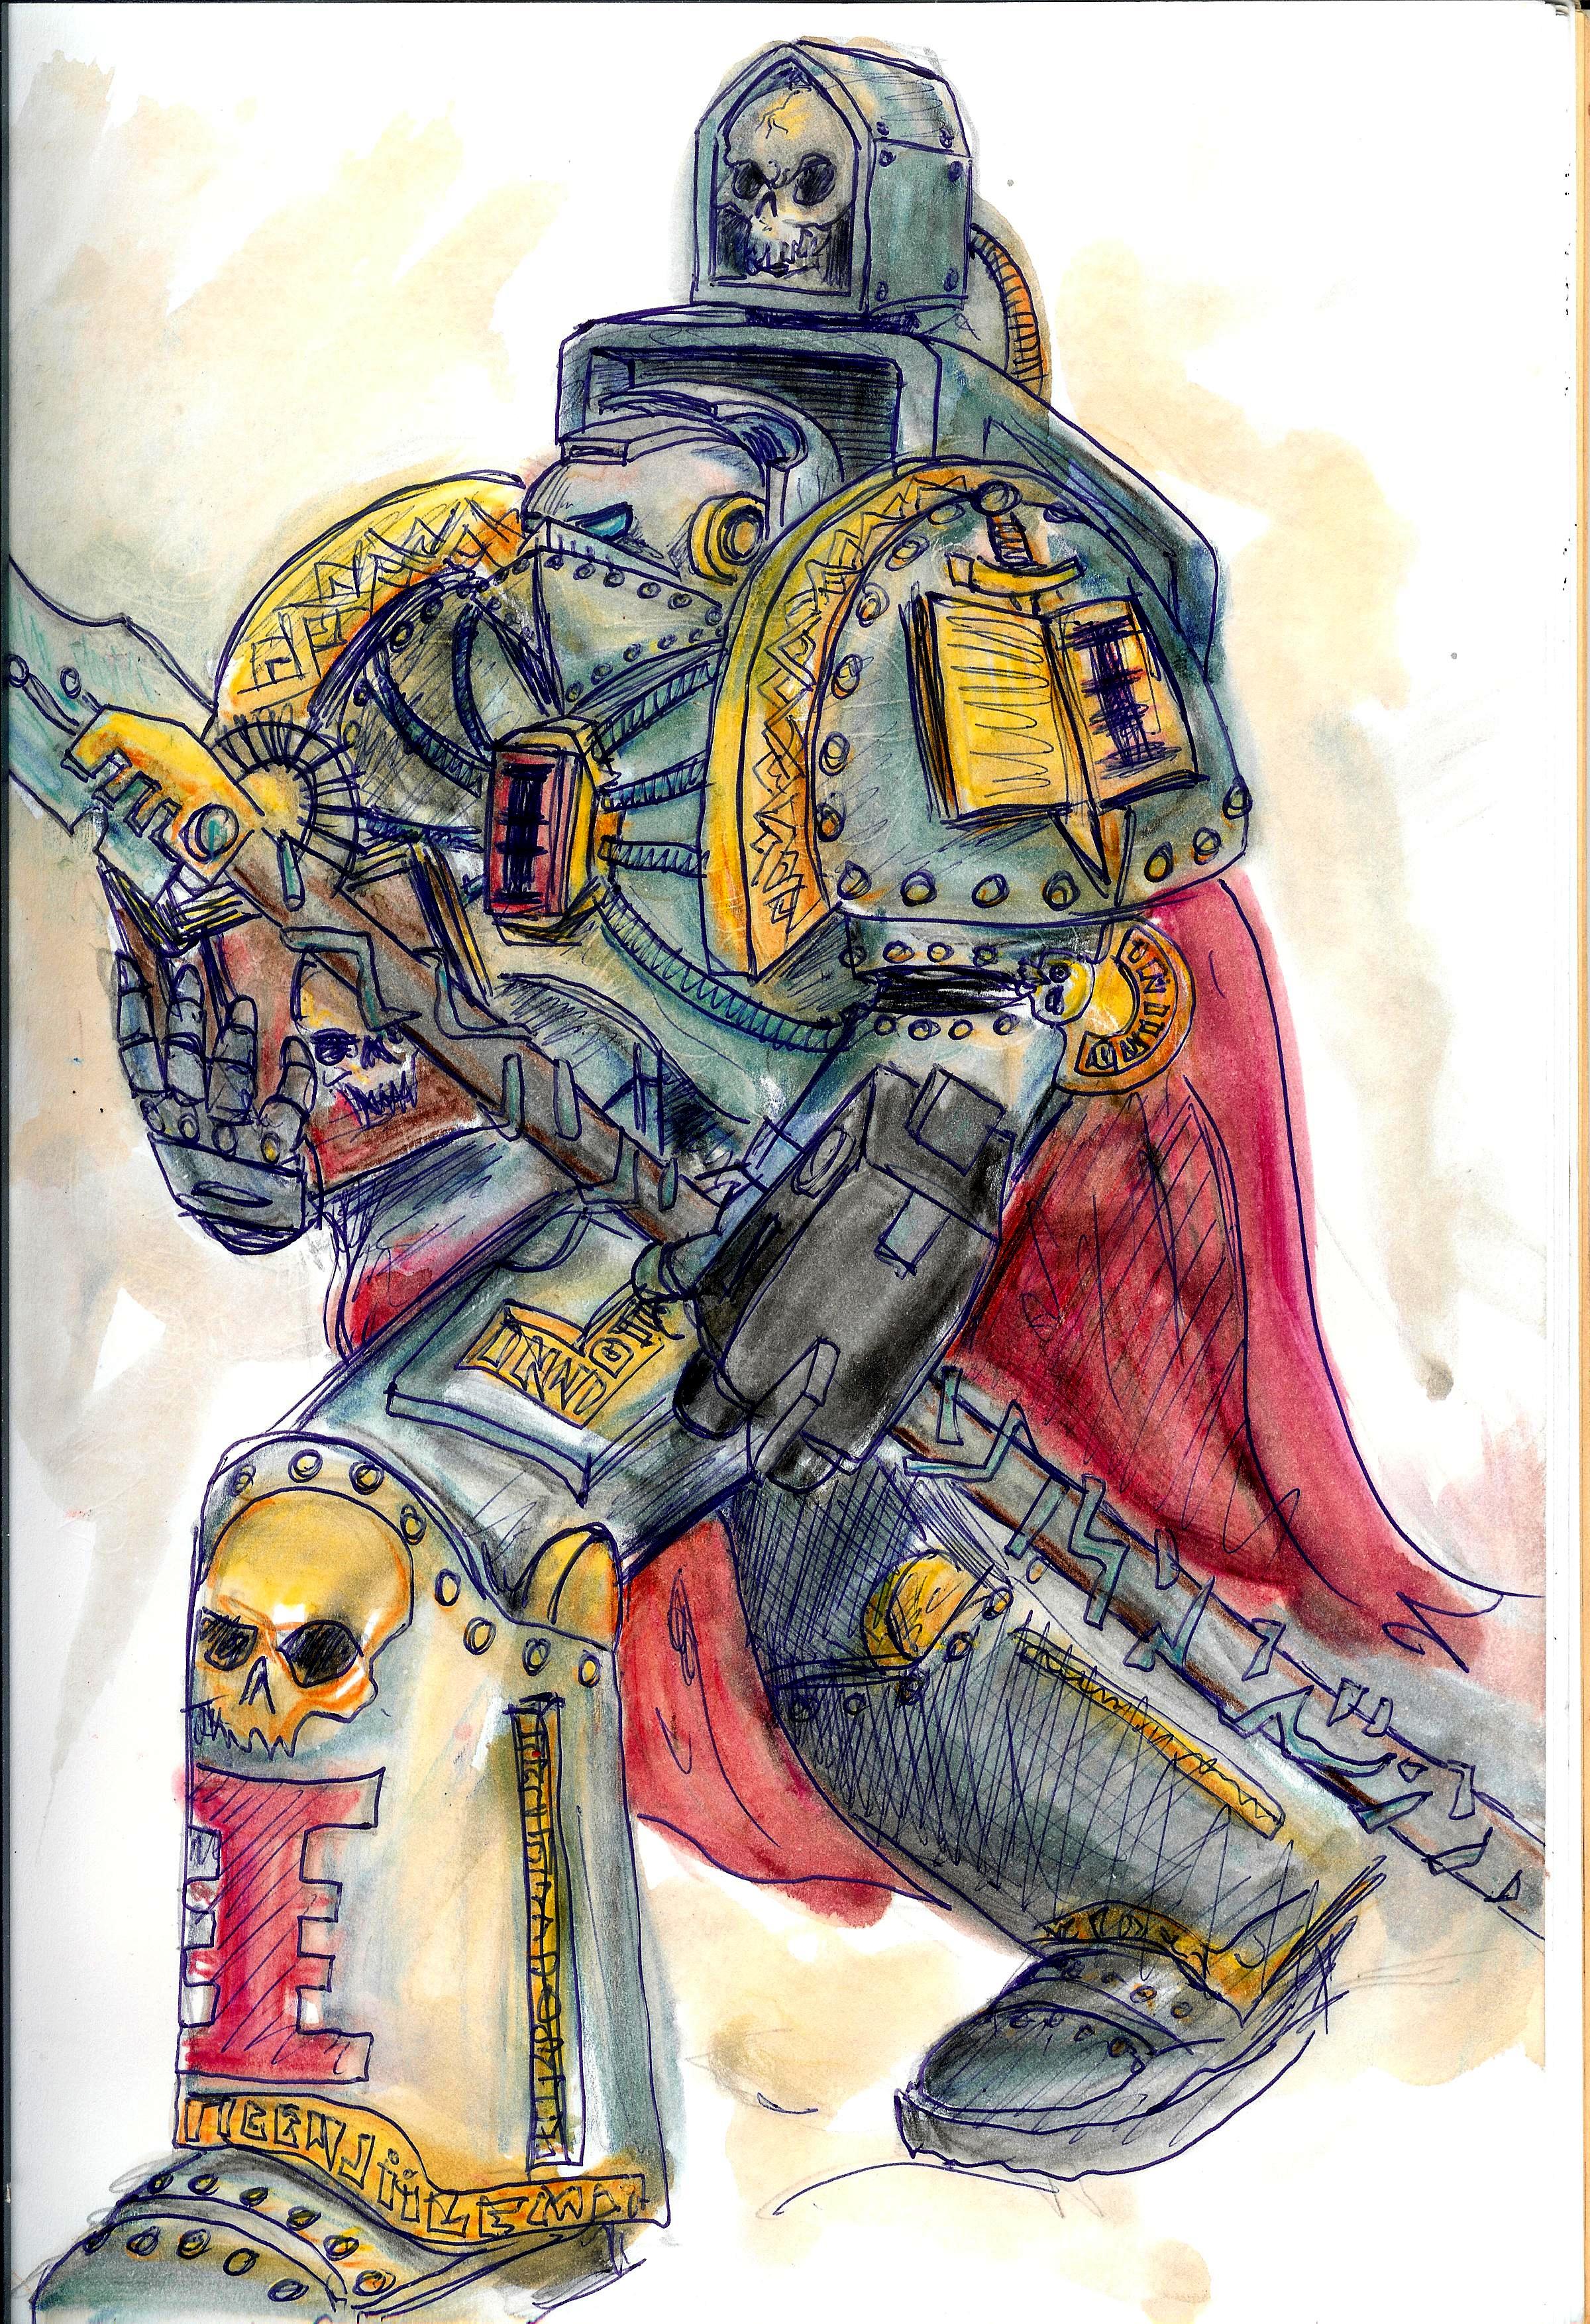 Artwork, Chaos, Chaos Space Marines, Drawing, Gk, Great, Guo, Librarian, Nurgle, Old, School, Space Marines, Style, Unclean